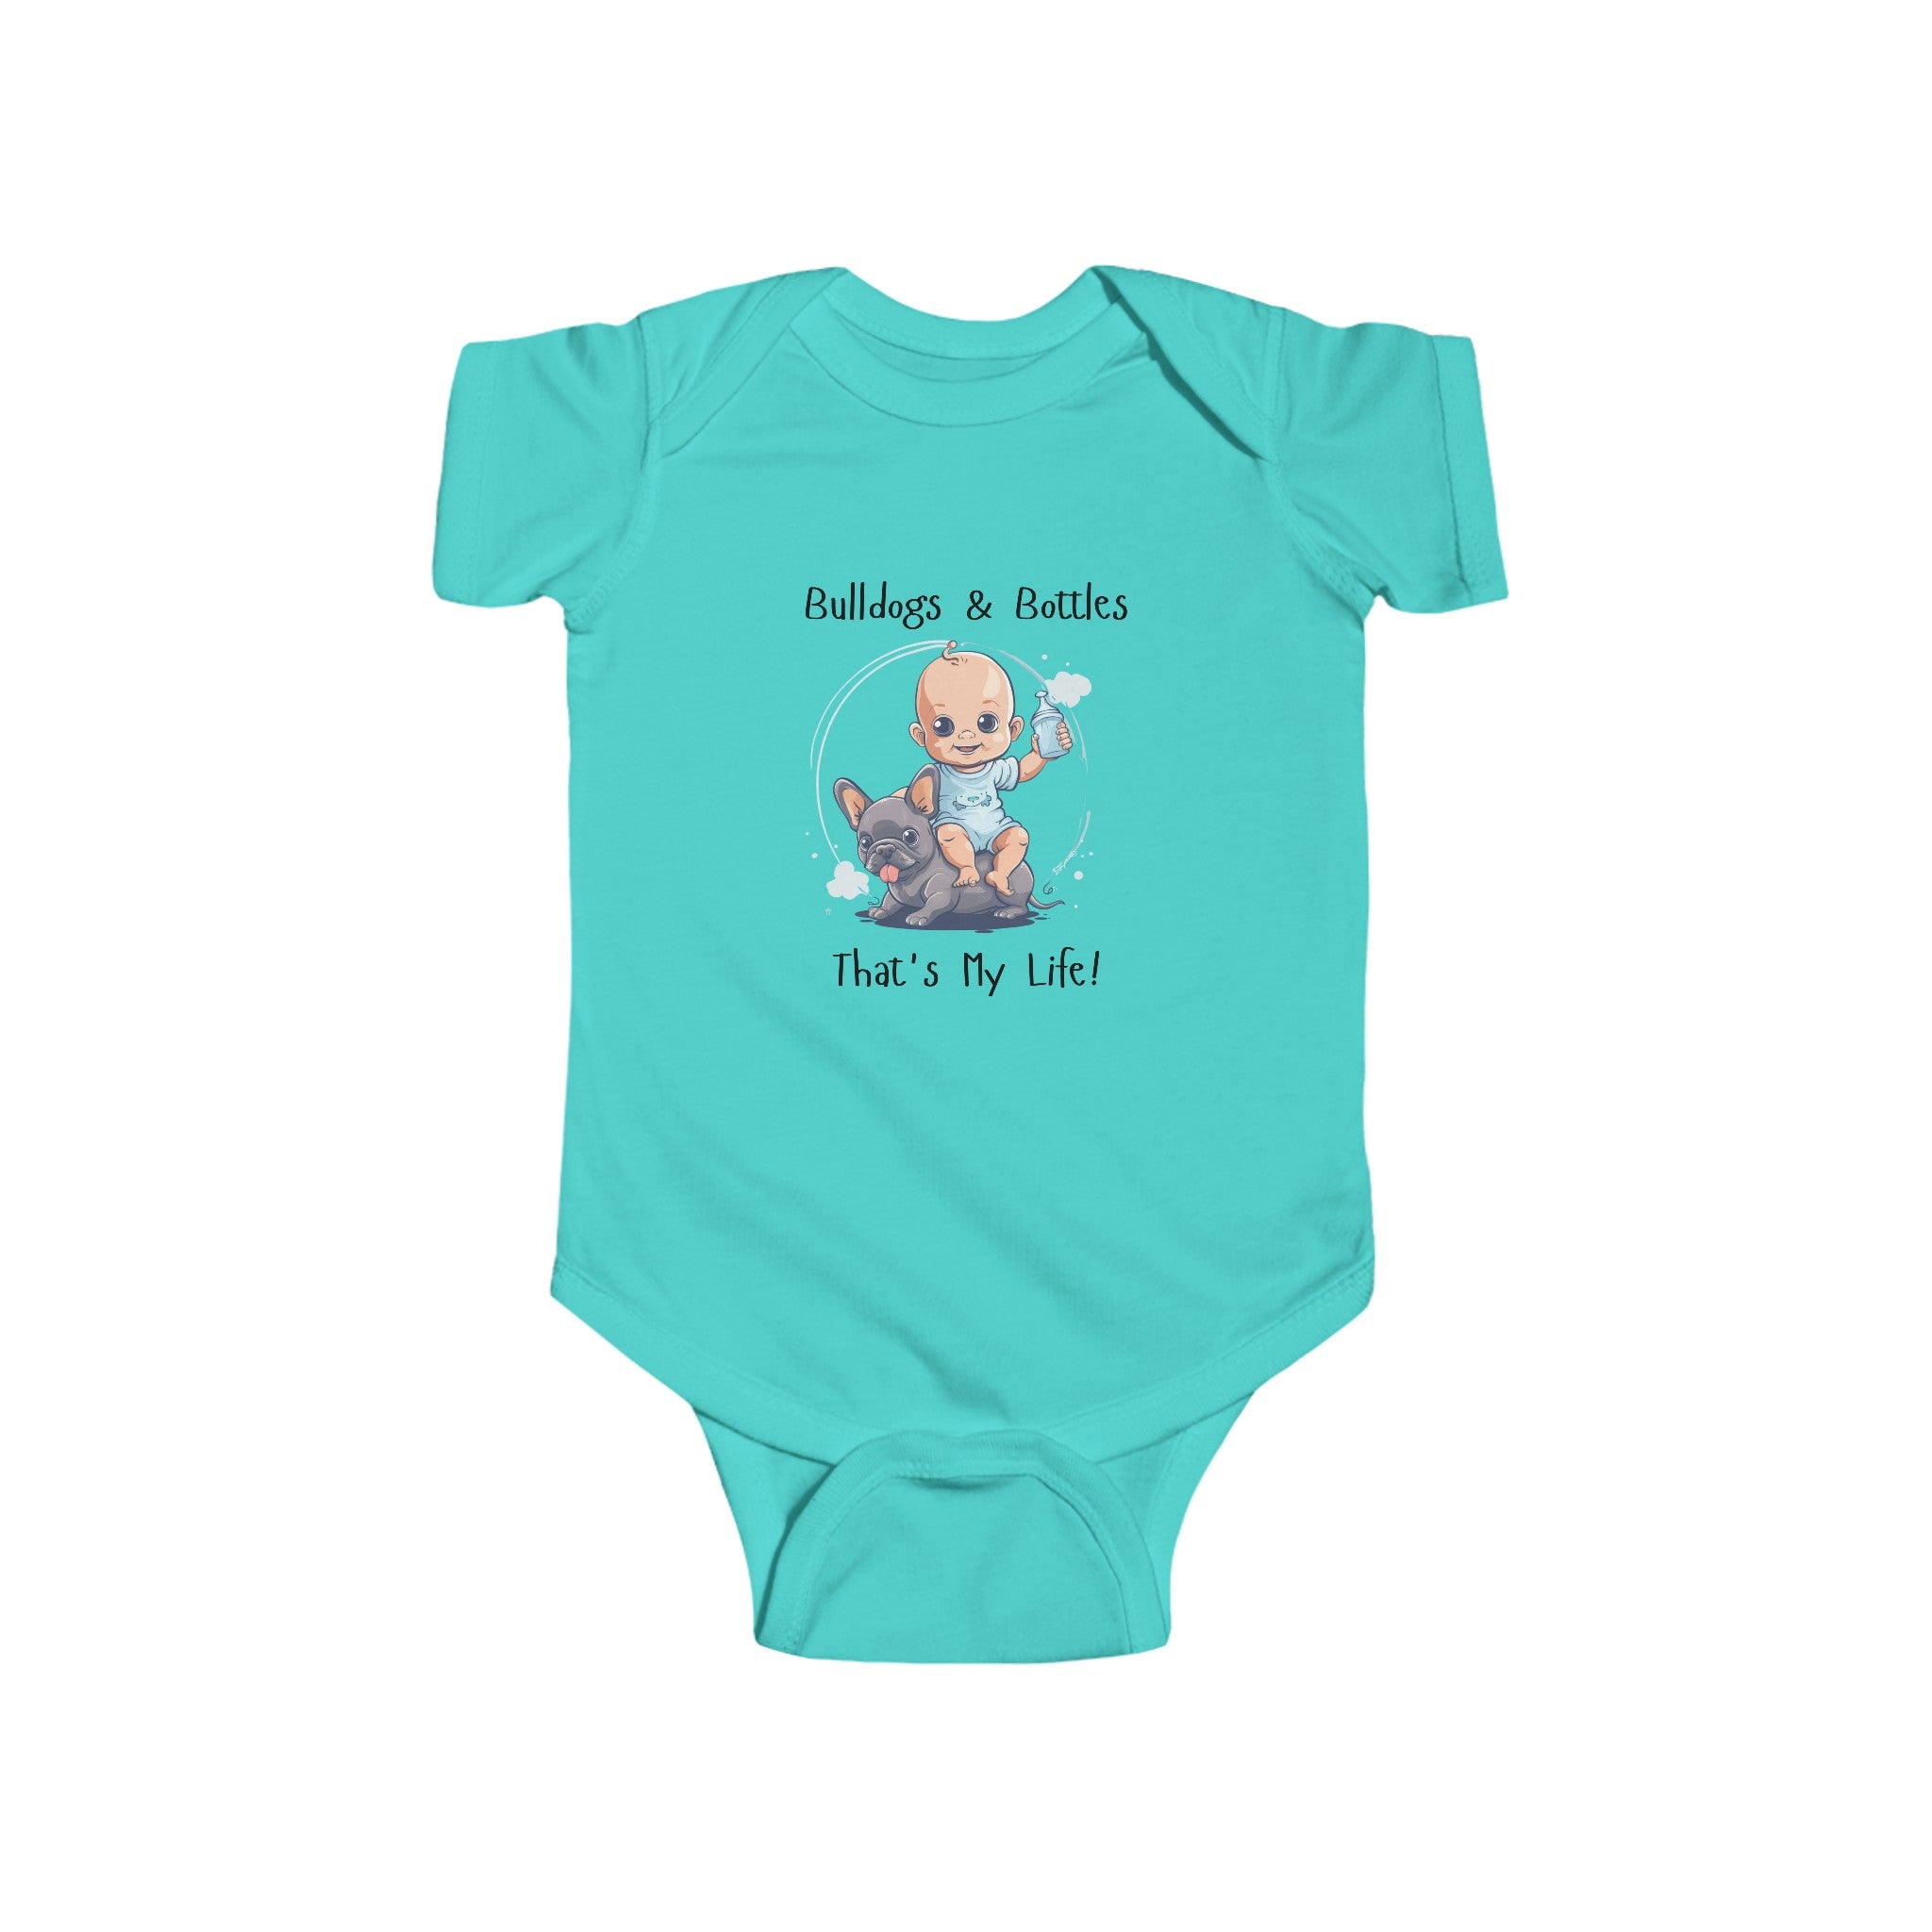 Bulldogs and Bottles, That's My Life!" Baby Onesie (French/Boy)